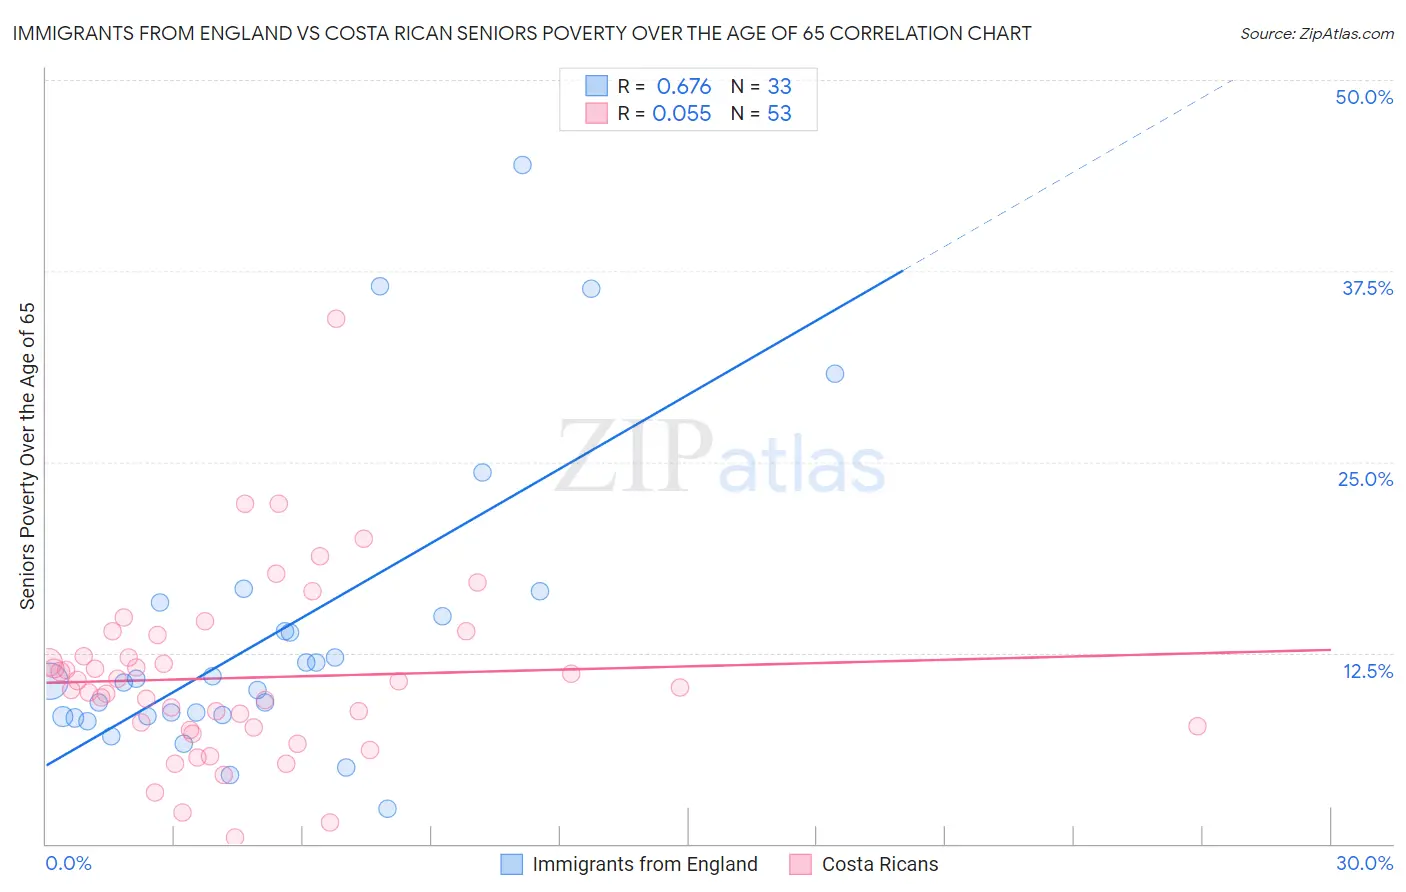 Immigrants from England vs Costa Rican Seniors Poverty Over the Age of 65